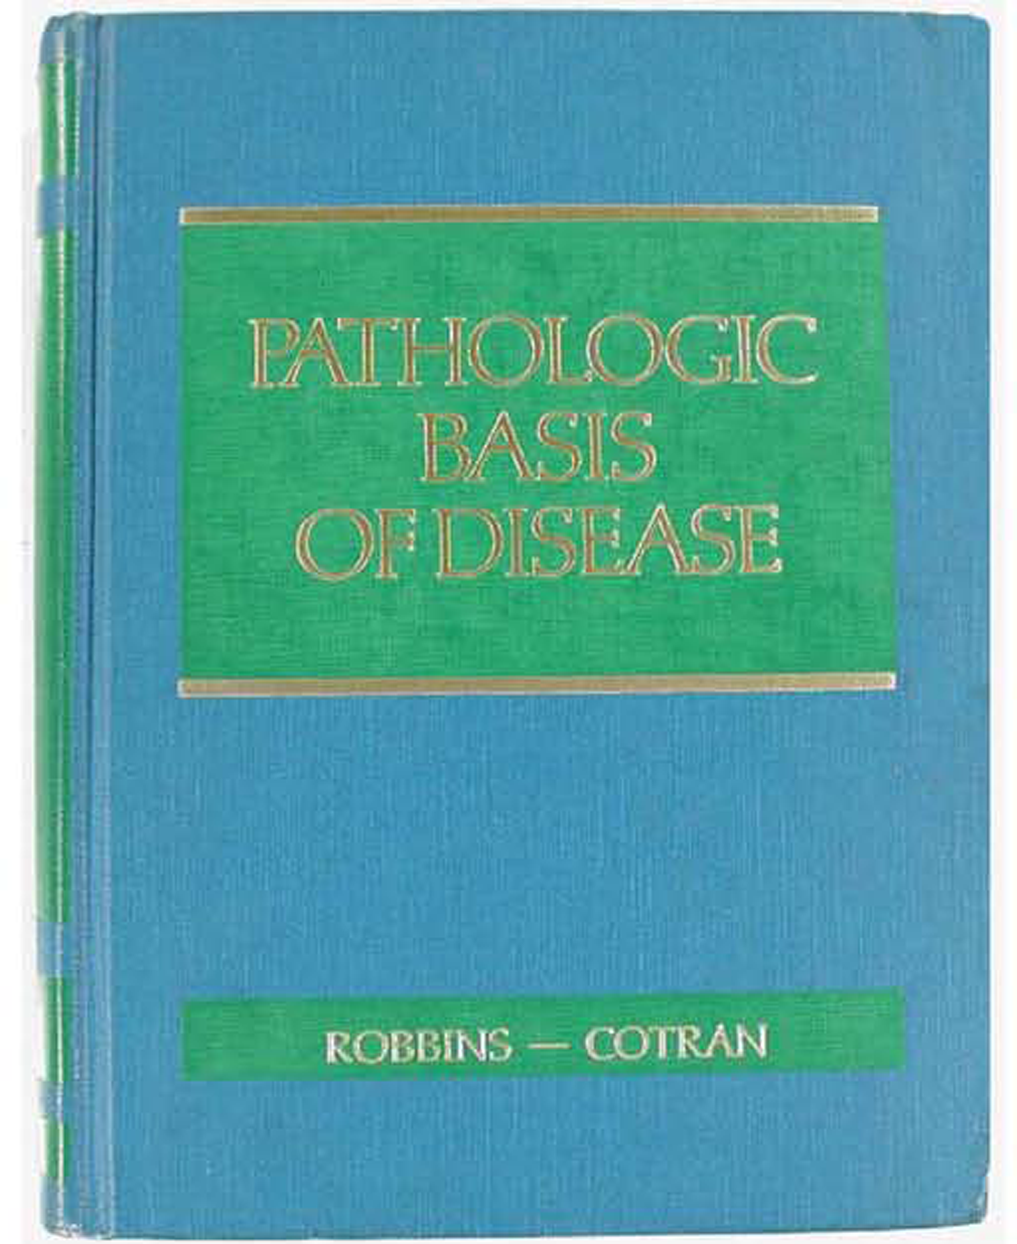 Dr Ramzi Cotran joins the second edition of the Pathologic Basis of Disease (1979)